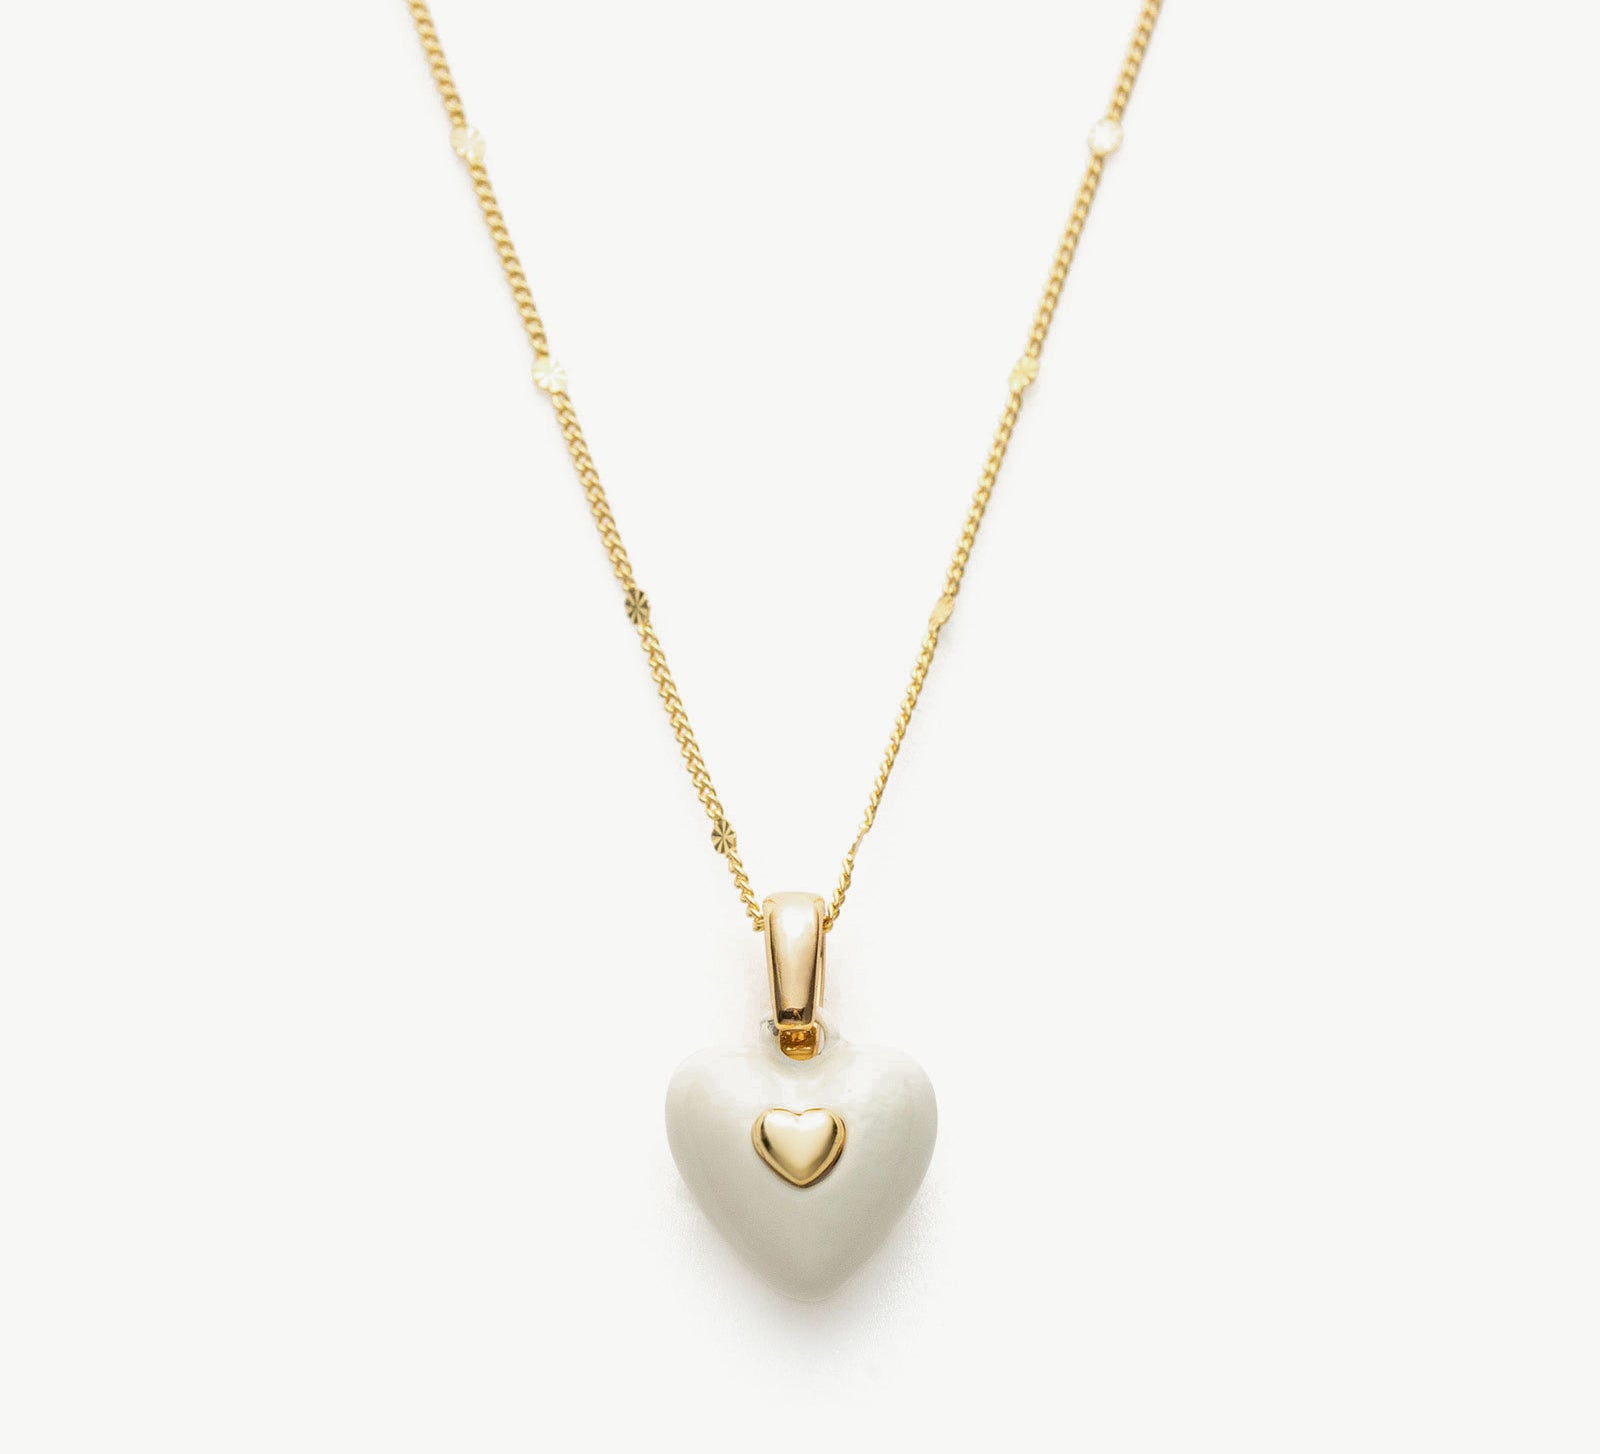 Onyx Heart Pendant Necklace in White, symbolizing opulent white beauty, this necklace features a captivating heart-shaped onyx pendant suspended from a delicate chain.